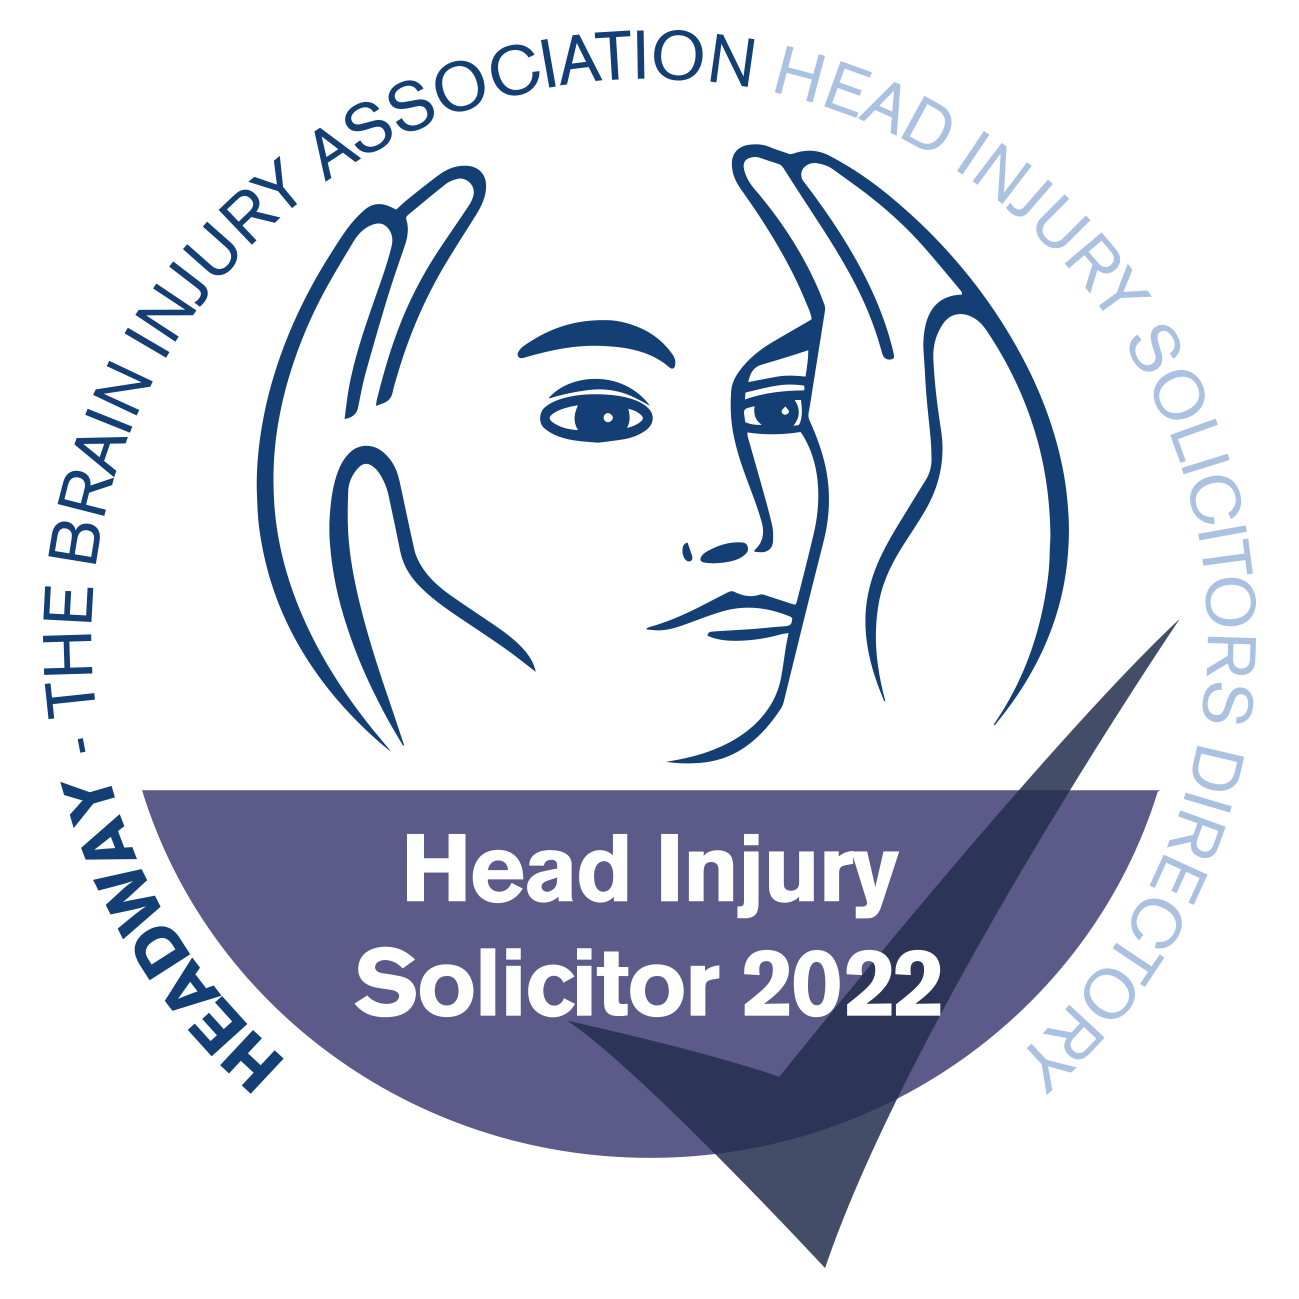 Head Injury Solicitor 2020